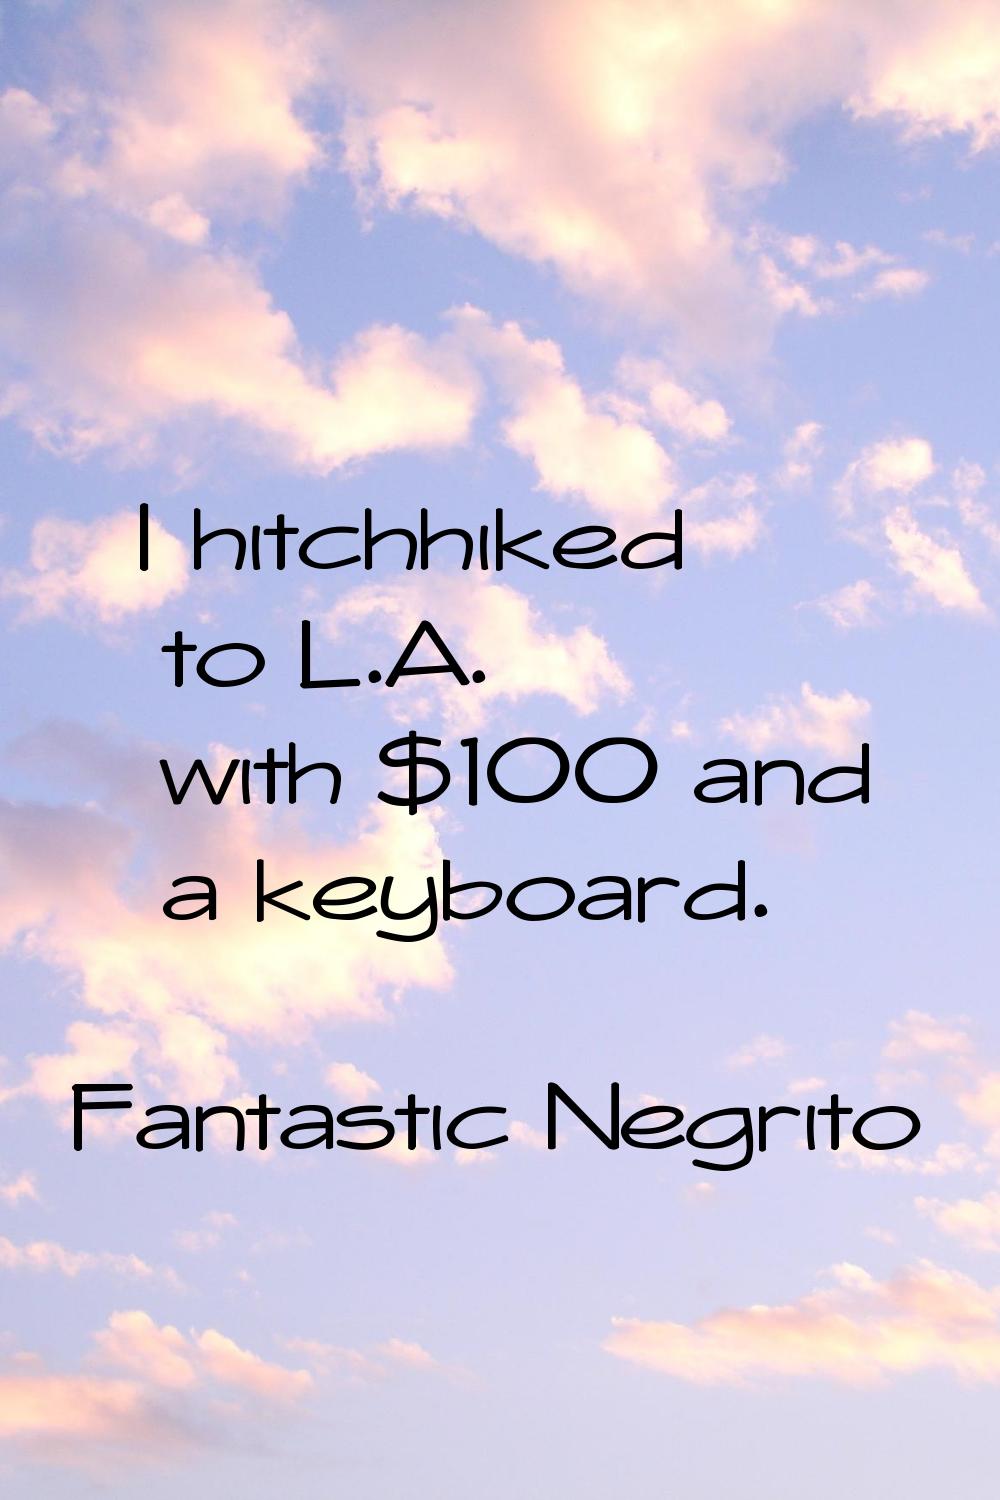 I hitchhiked to L.A. with $100 and a keyboard.